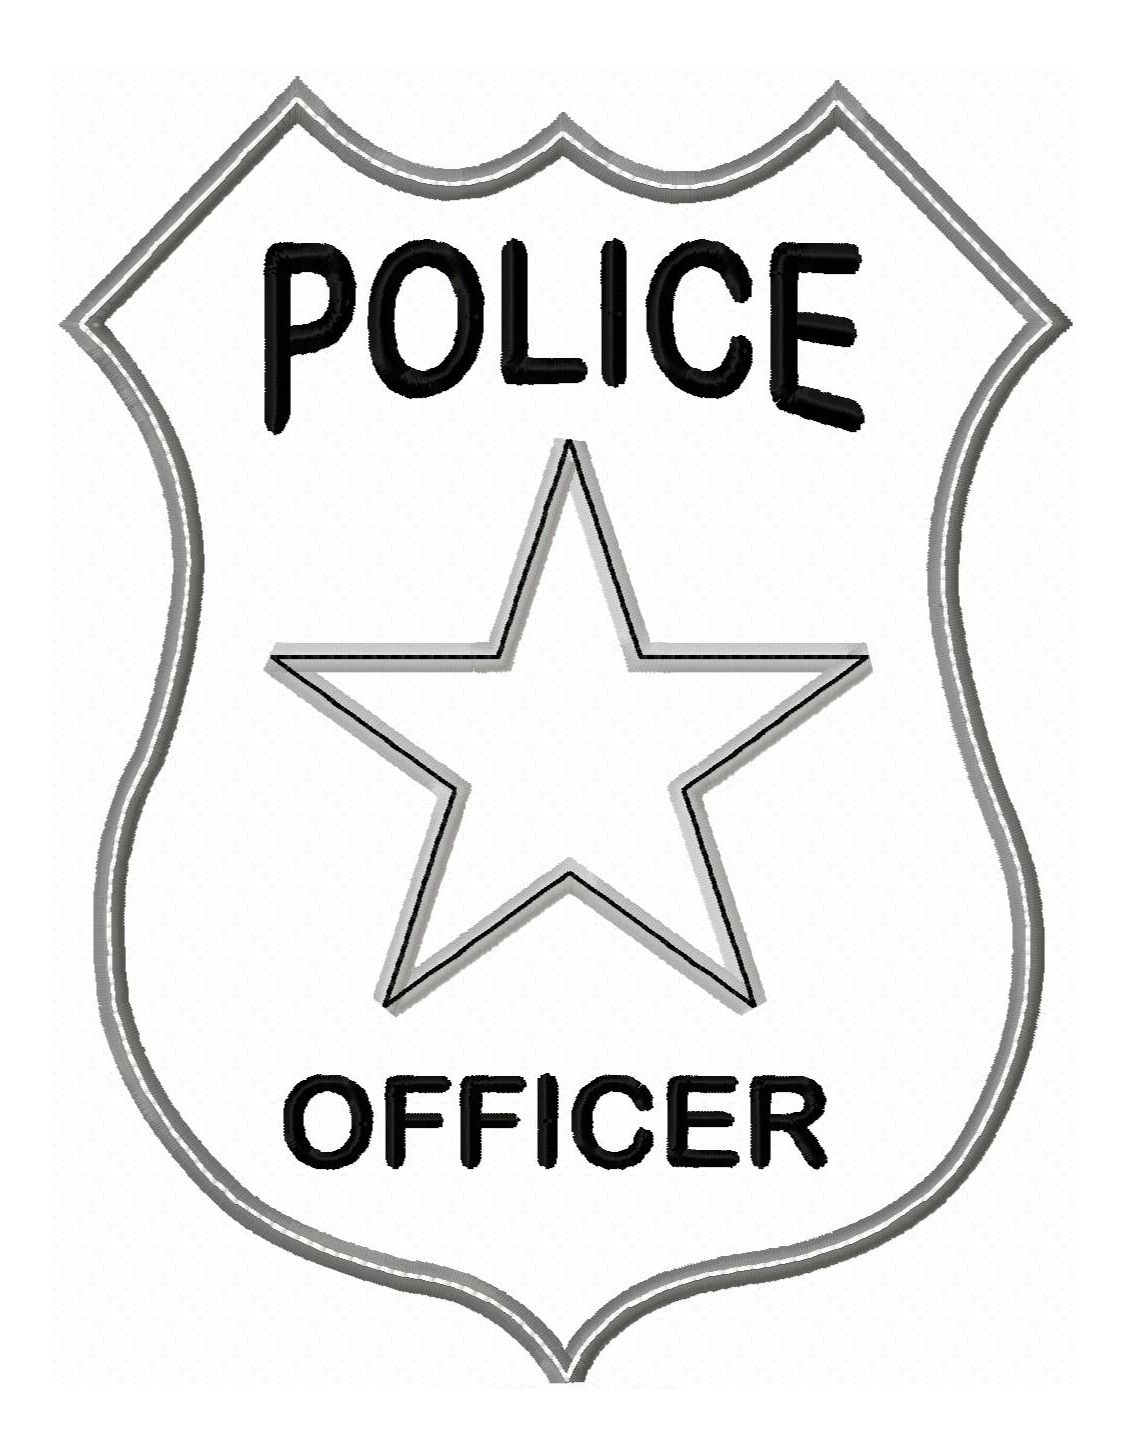 Police Officer Badge Coloring Page - Coloring Pages for Kids and ...